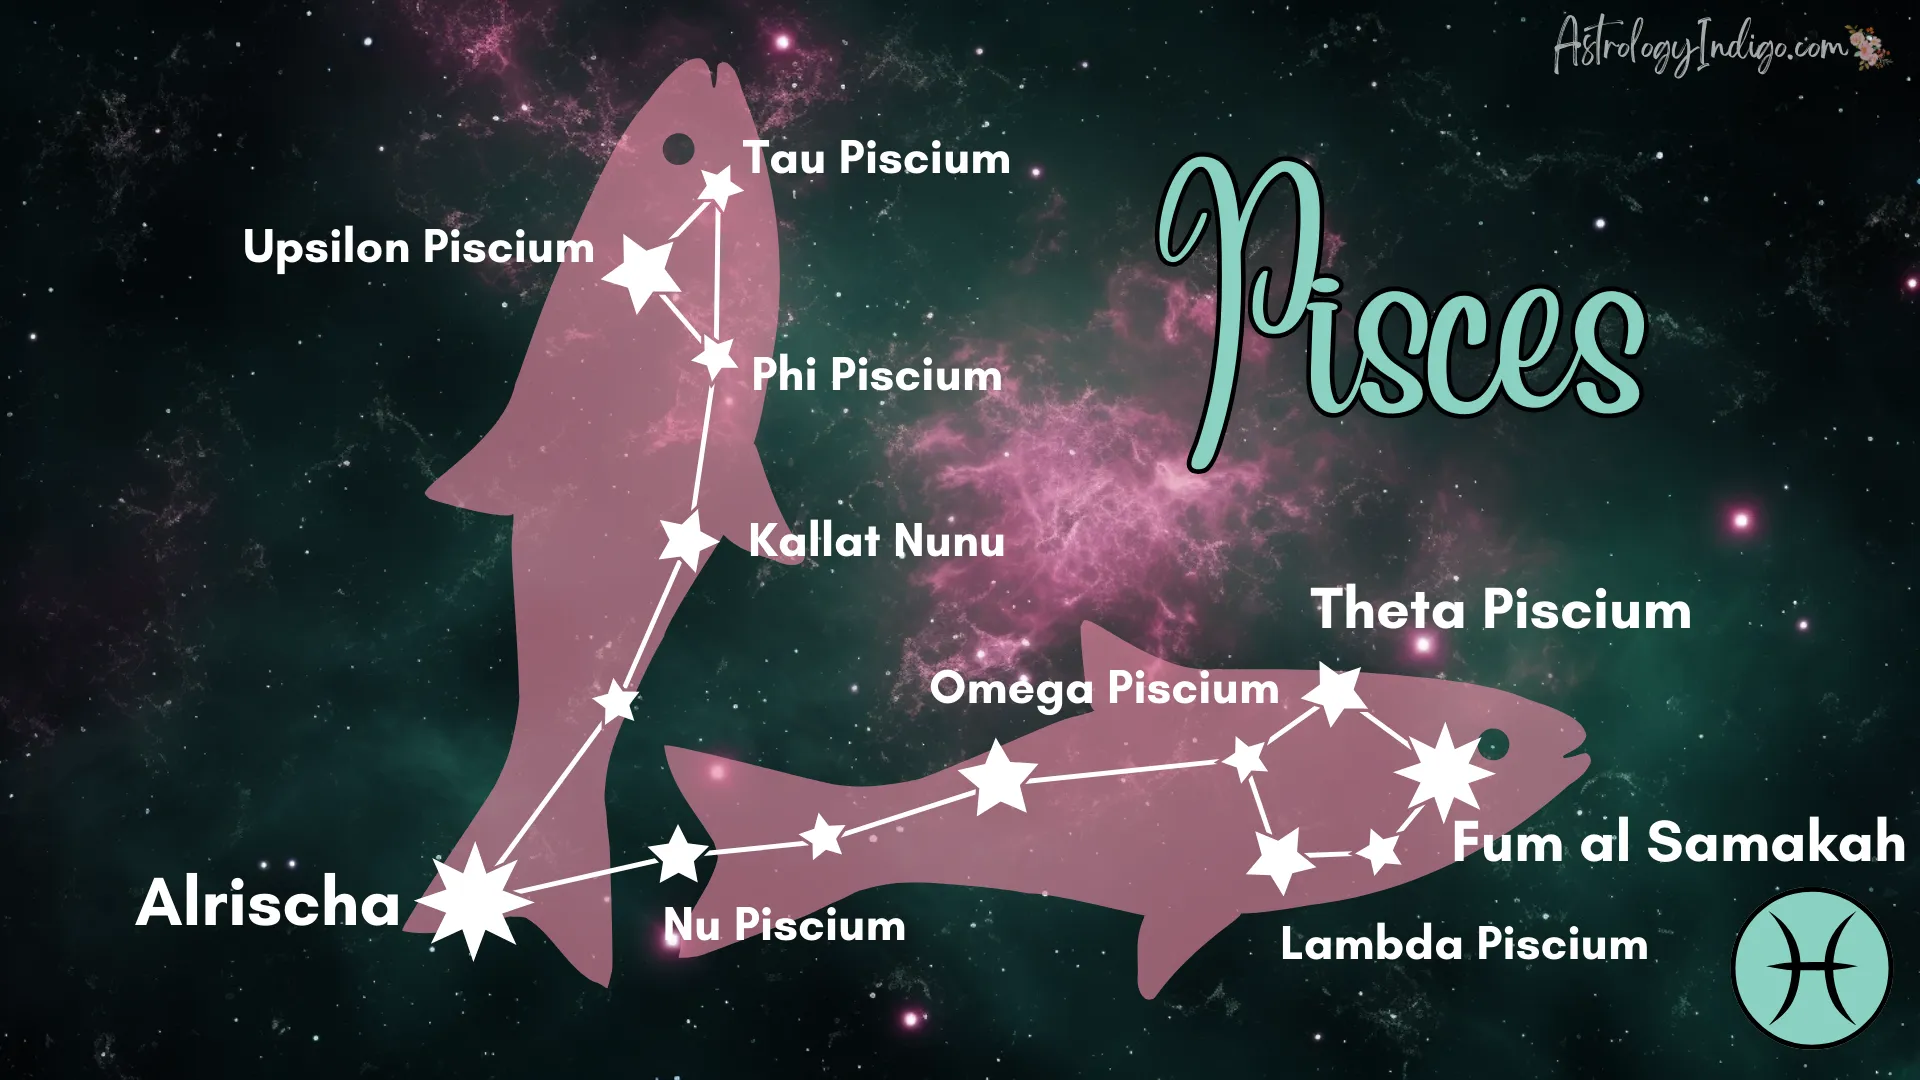 The Pisces constellation with information about the stars and an image of two pink fish behind it.